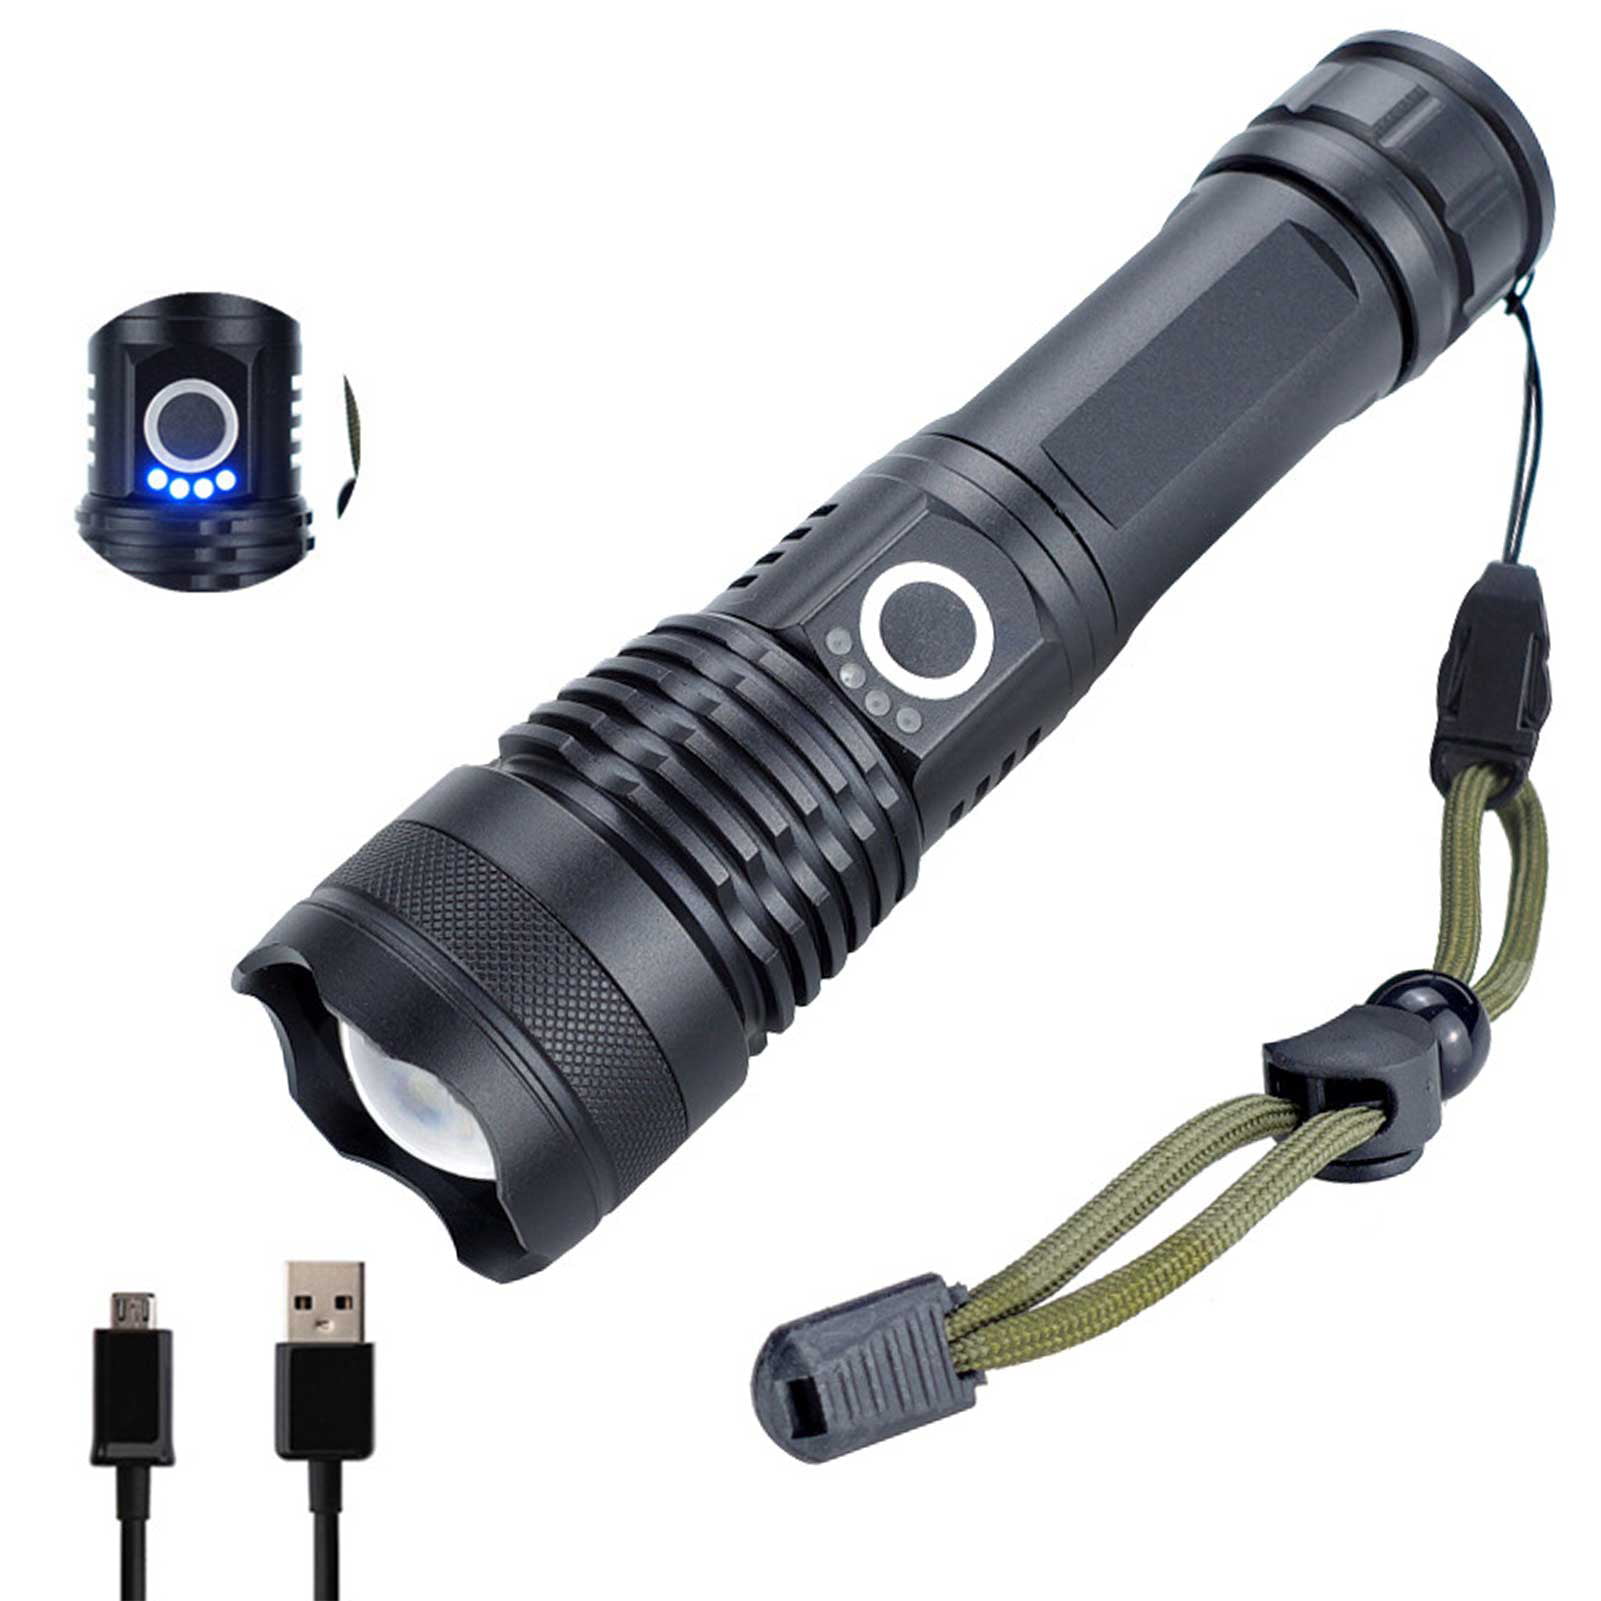 T6 LED Rechargeable High Power 200000LM Torch Flashlight Lamp Light Outdoor Lamp 